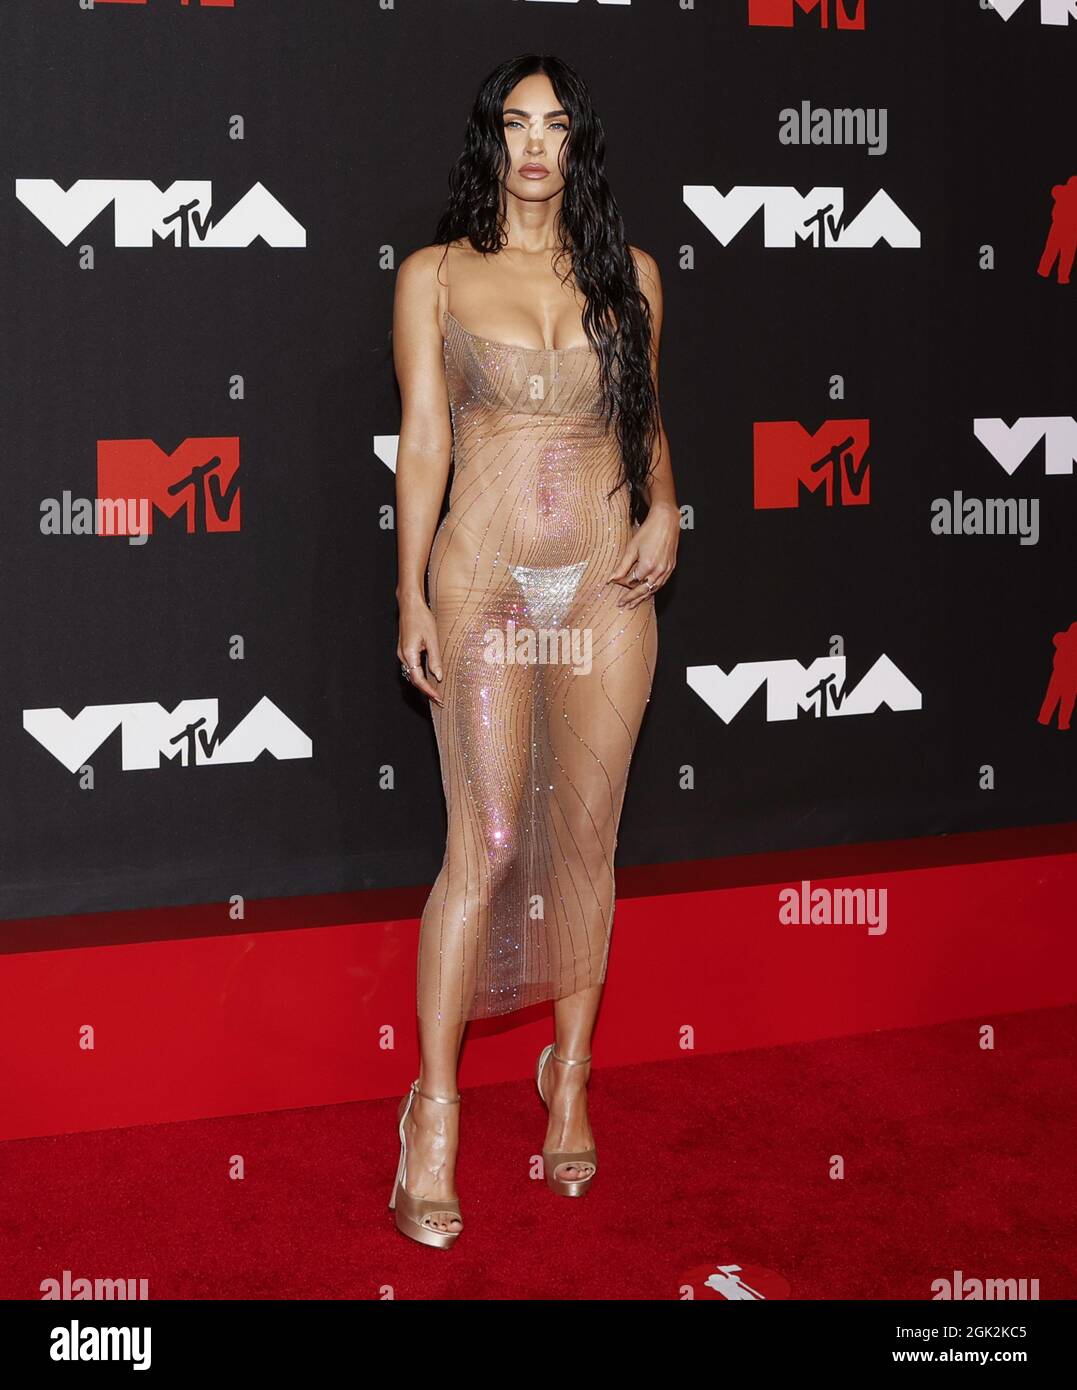 New York, United States. 13th Sep, 2021. Megan Fox arrives on the red carpet at the 38th annual MTV Video Music Awards at Barclays Center in New York City on Sunday, September 12, 2021. Photo by John Angelillo/UPI Credit: UPI/Alamy Live News Stock Photo